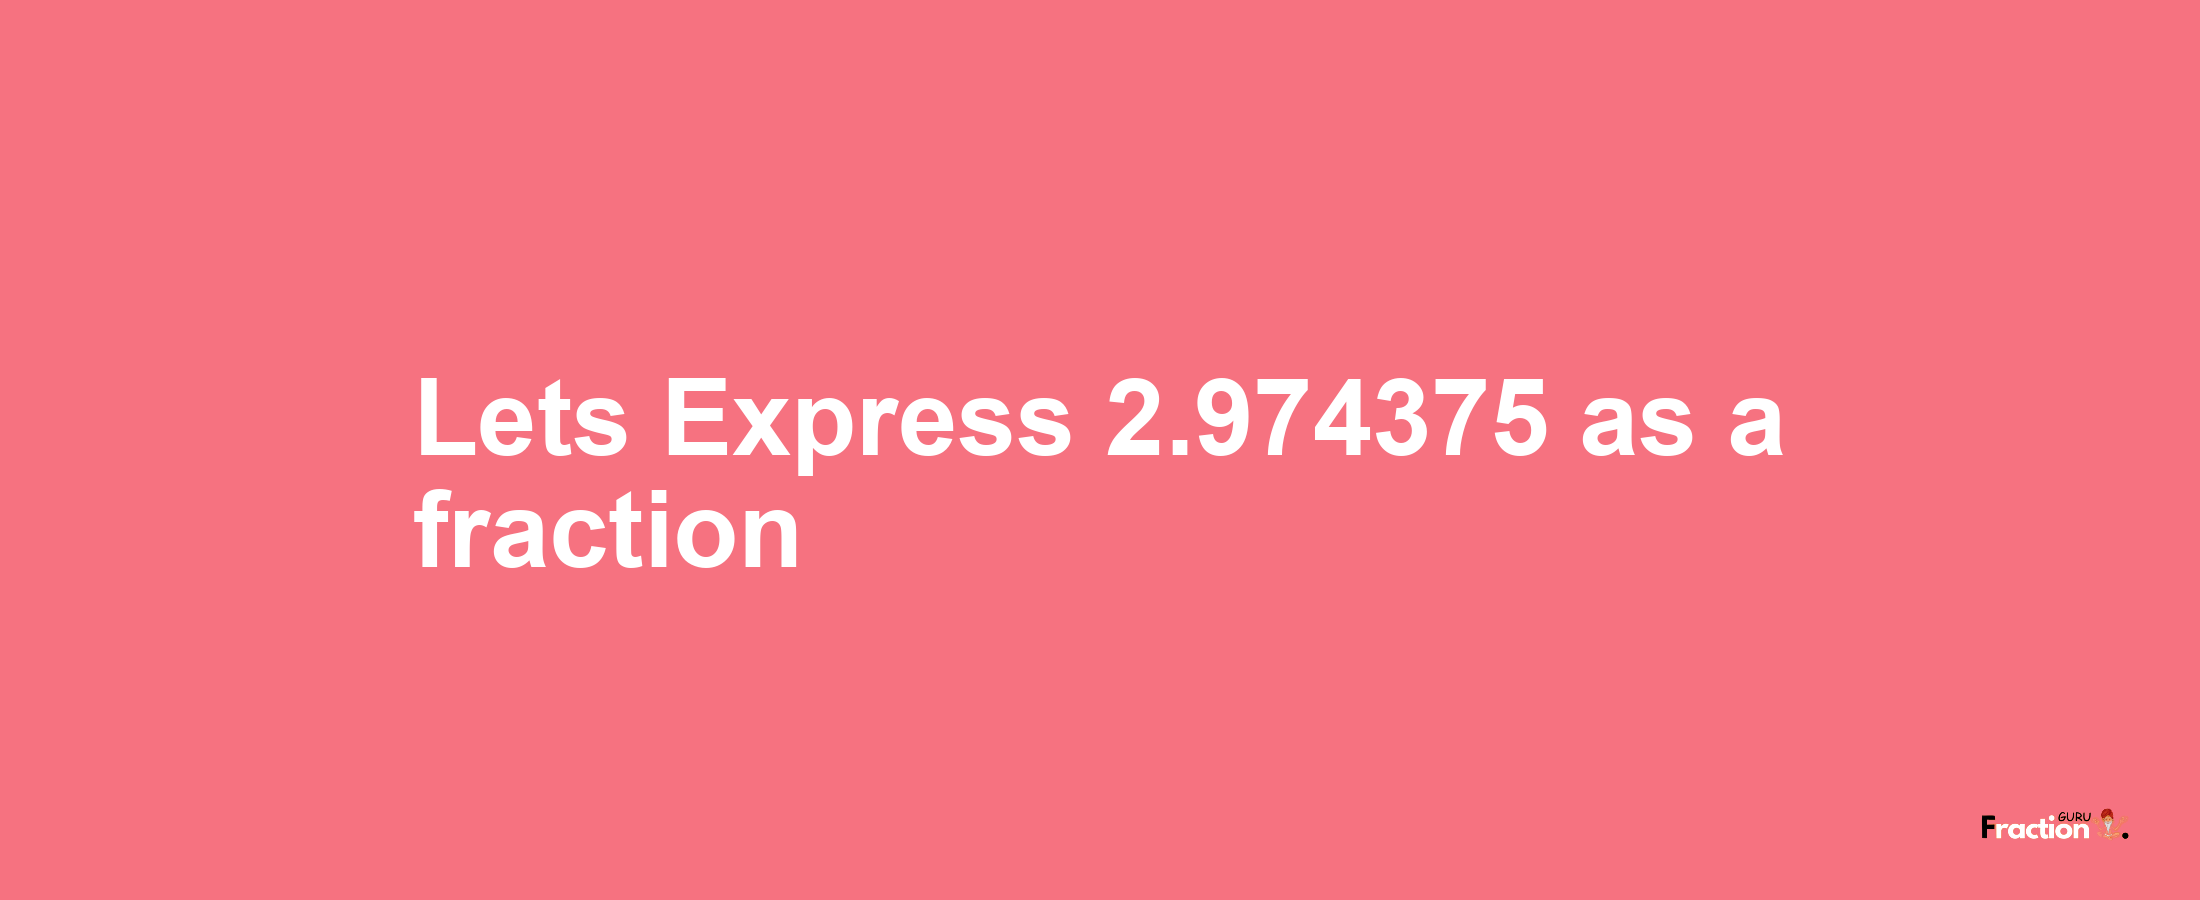 Lets Express 2.974375 as afraction